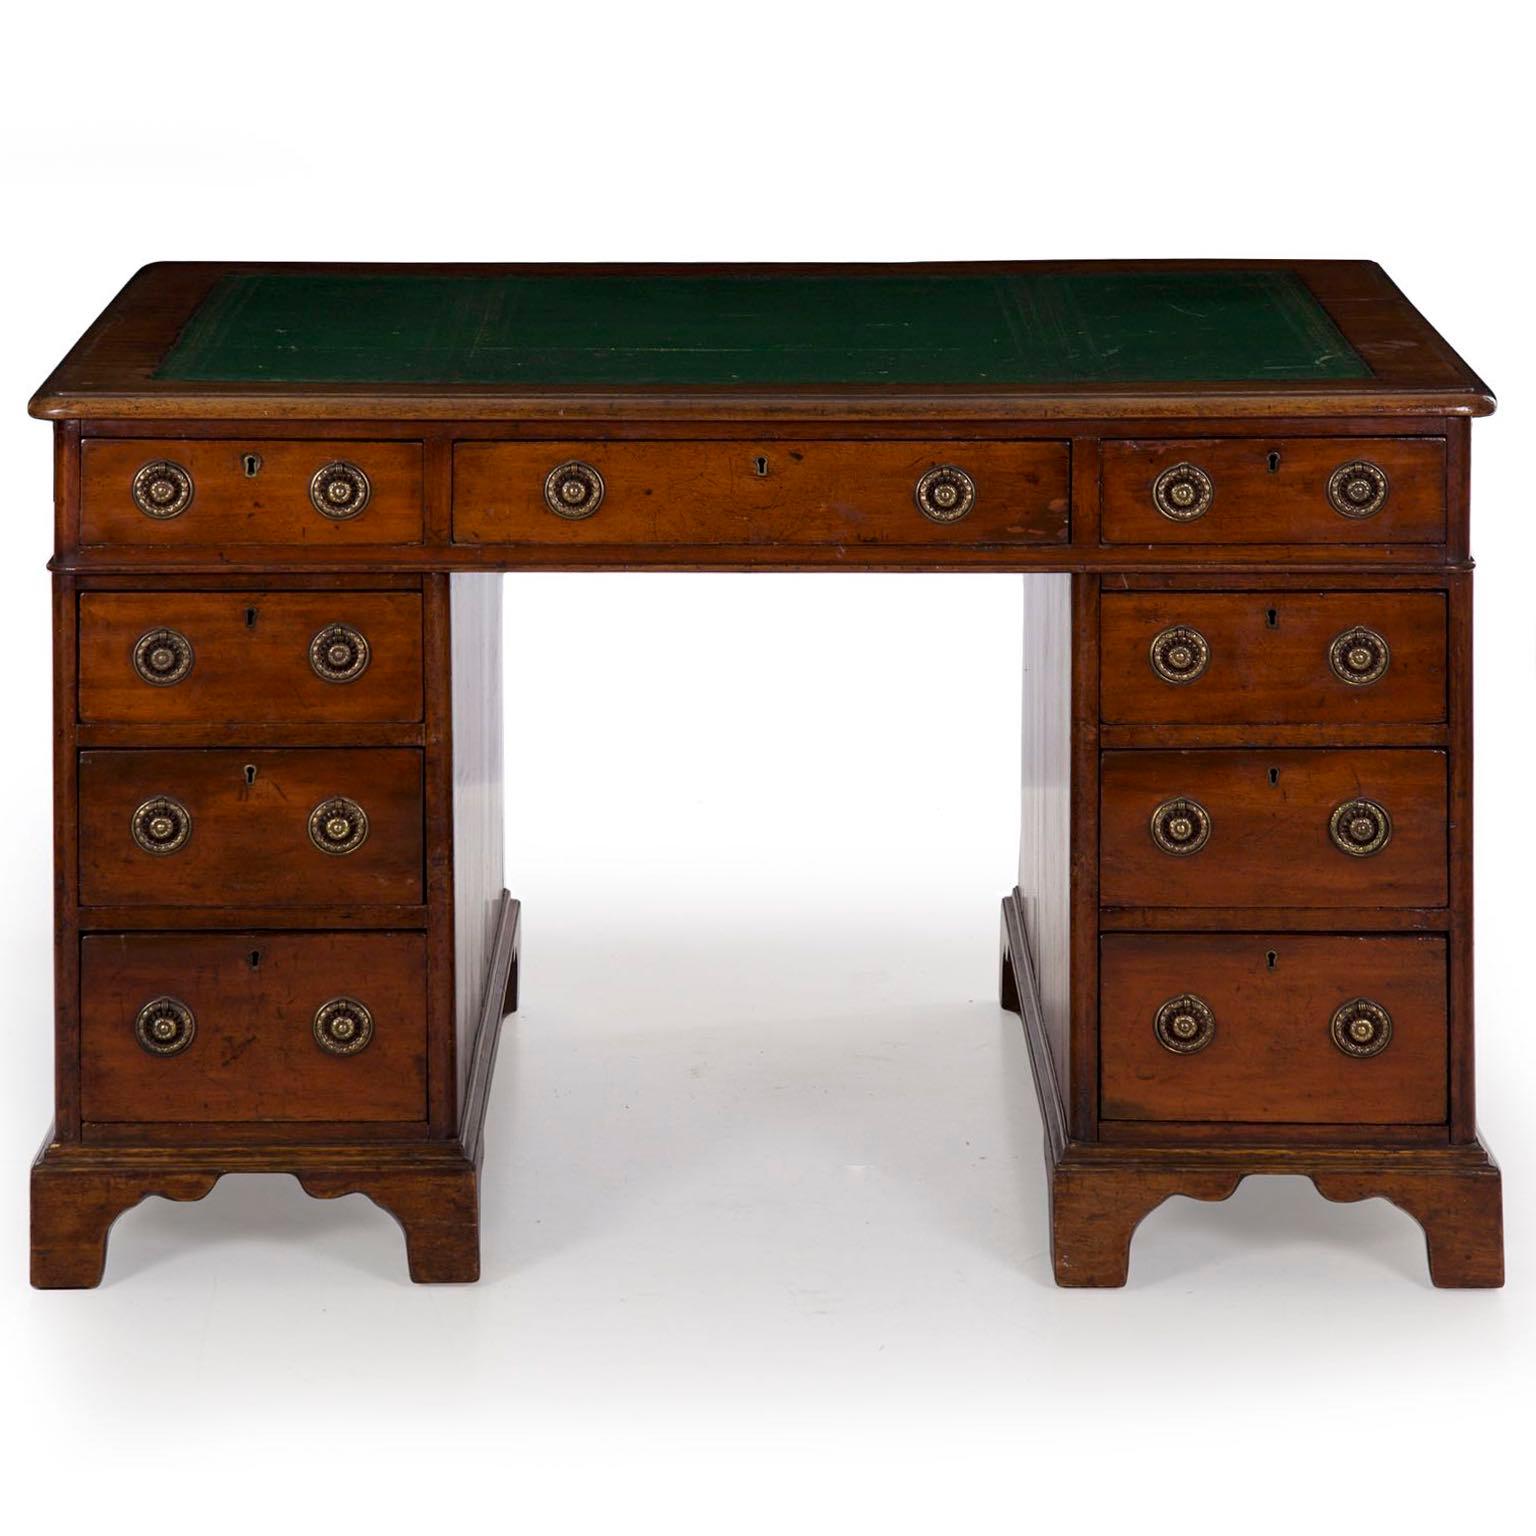 An attractive and well worn English Victorian period antique pedestal desk from the third quarter of the 19th century, the warm patina in the mellowed mahogany is most striking. The gilt tooled green leather top is quite old and likely original,